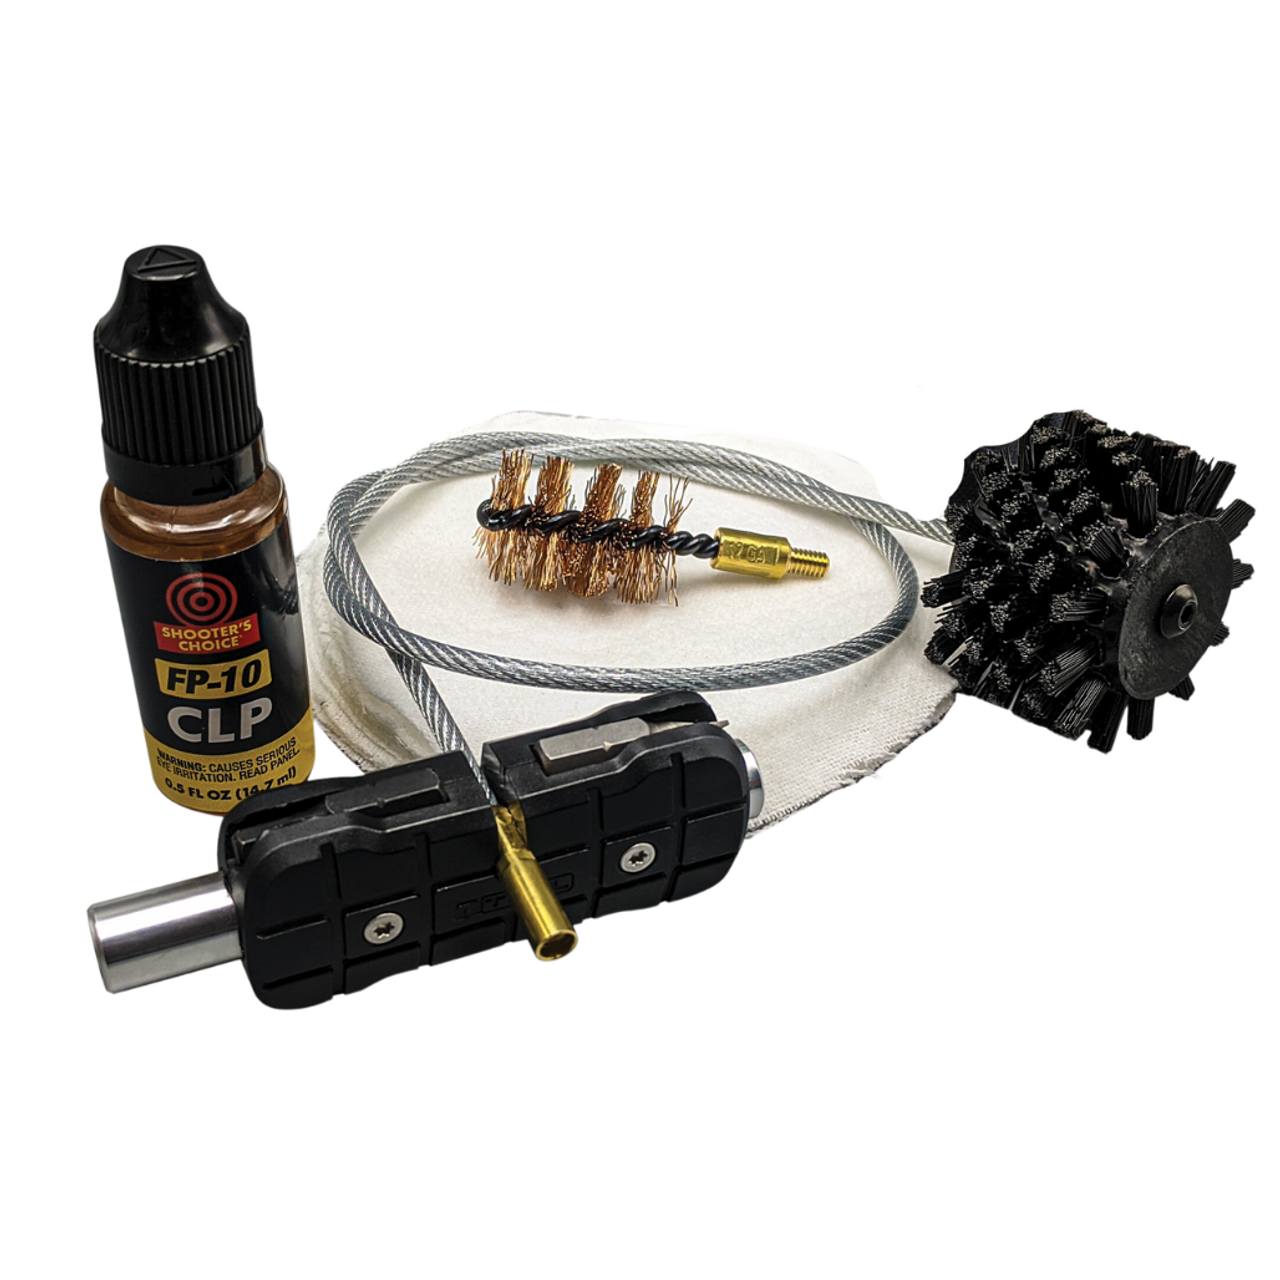 Less Lethal Cleaning Kit | 37mm/40mm/12Ga